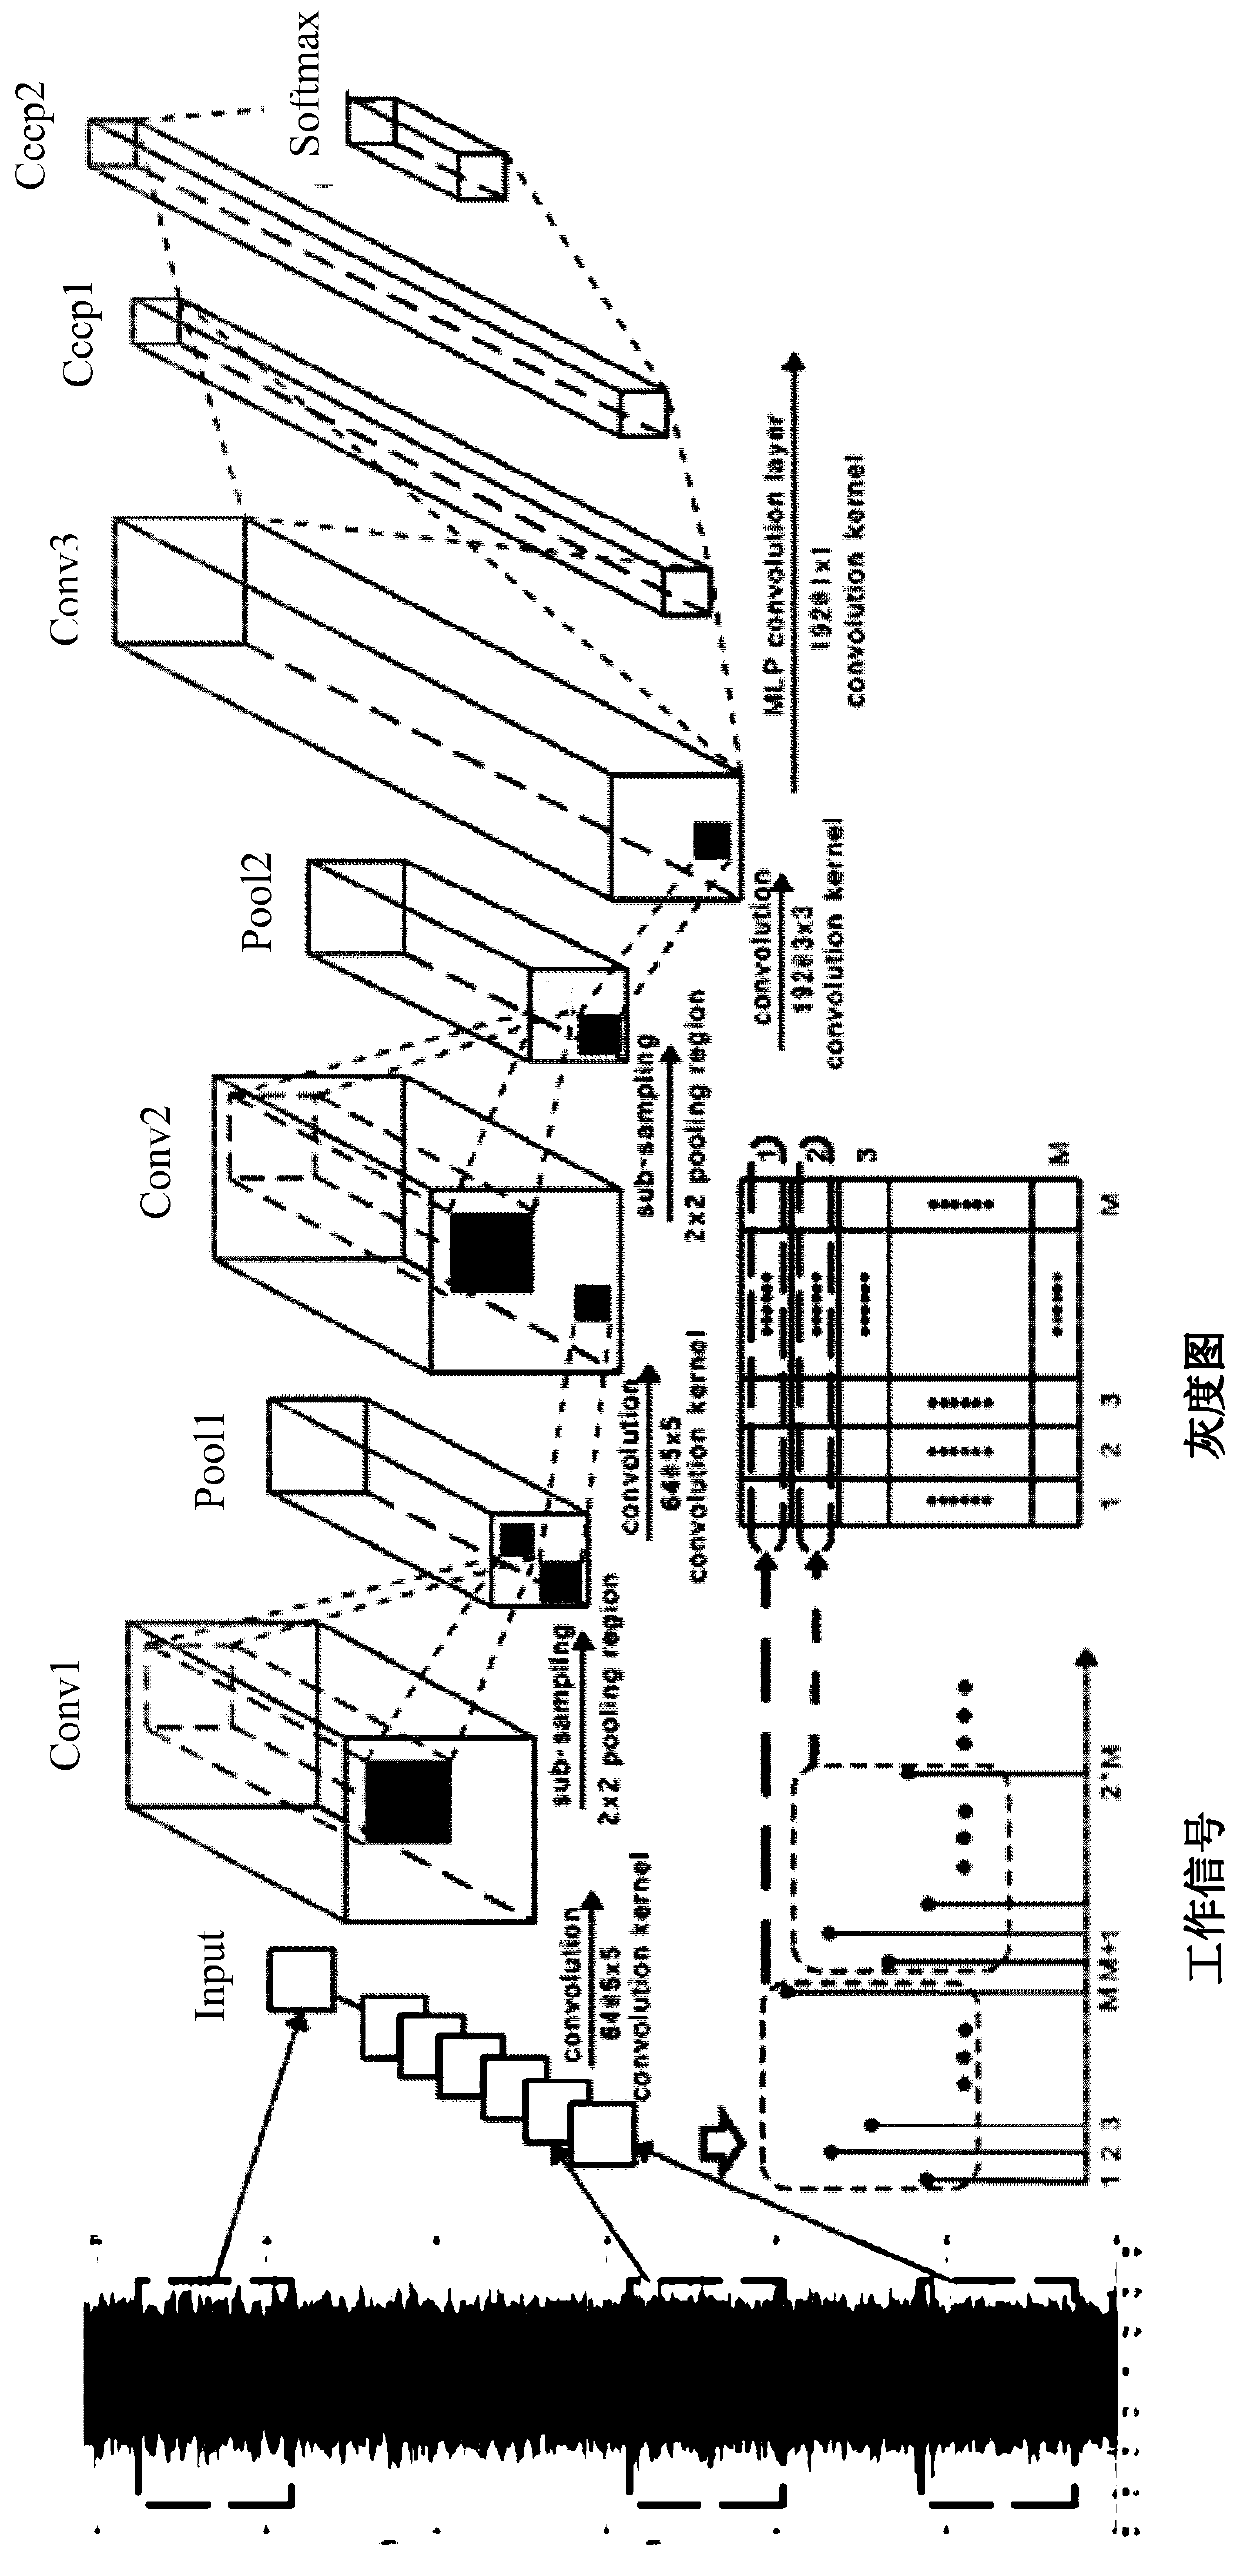 Fault diagnosis method of rotating machinery based on optimized structure convolutional neural network